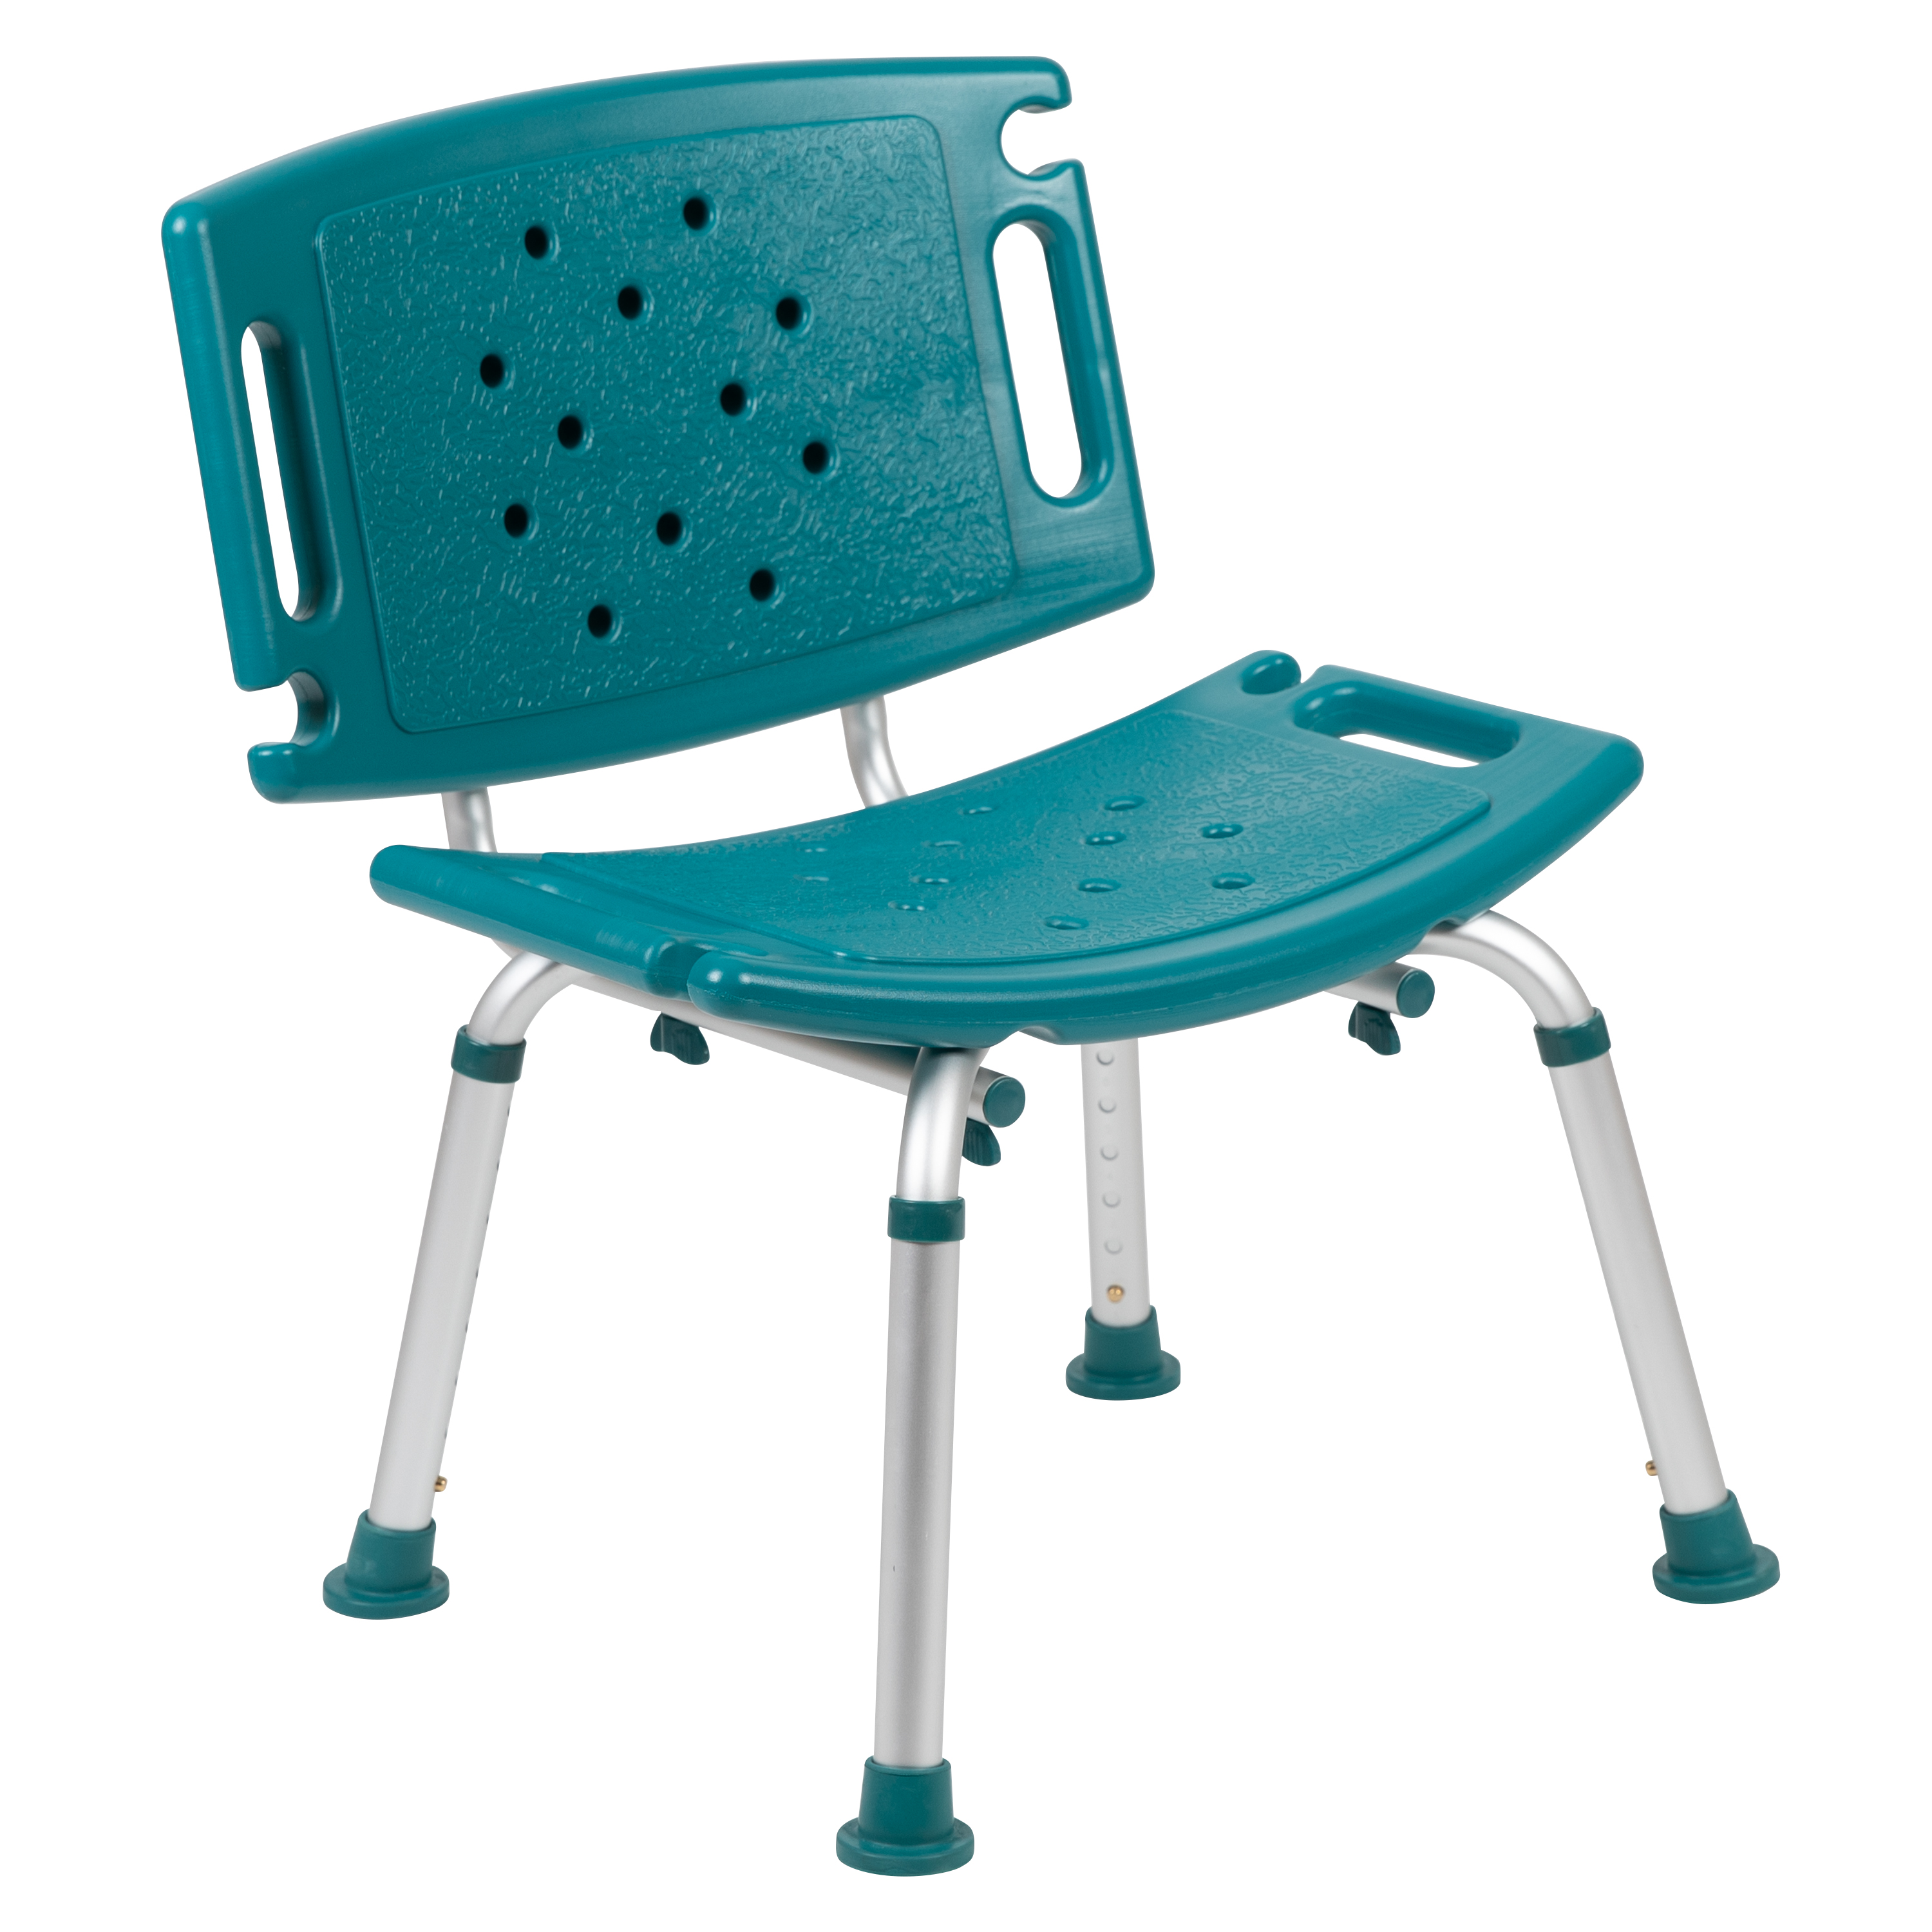 Flash Furniture DC-HY3501L-TL-GG Hercules 300 Lb. Capacity Teal Bath & Shower Chair with Extra Large Back